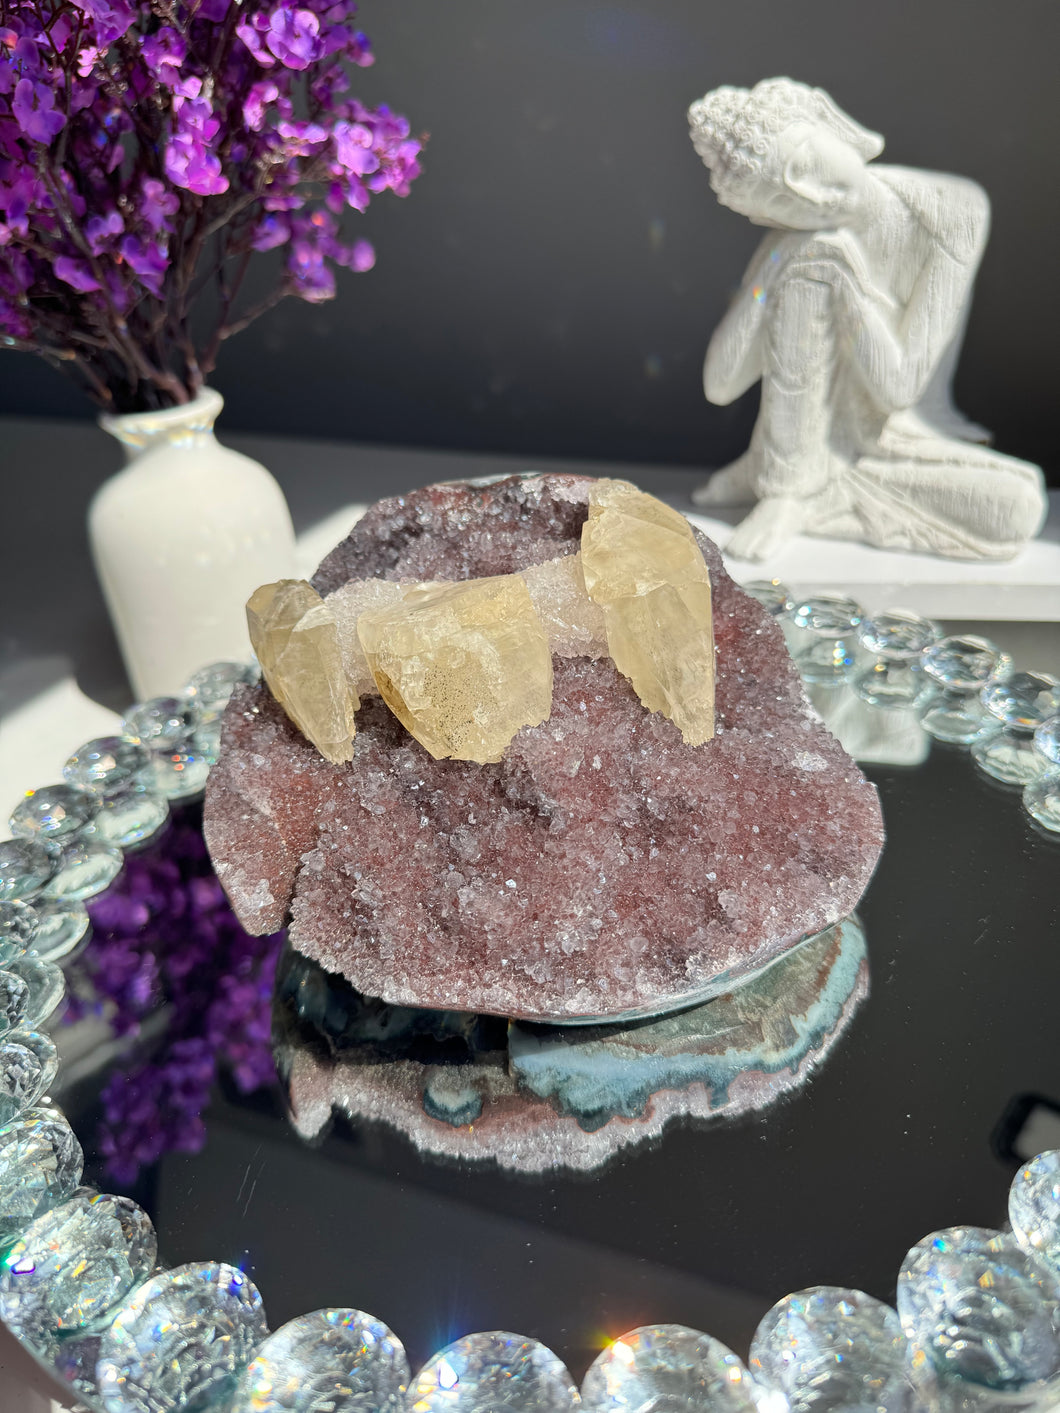 Amethyst geode with calcite 2732